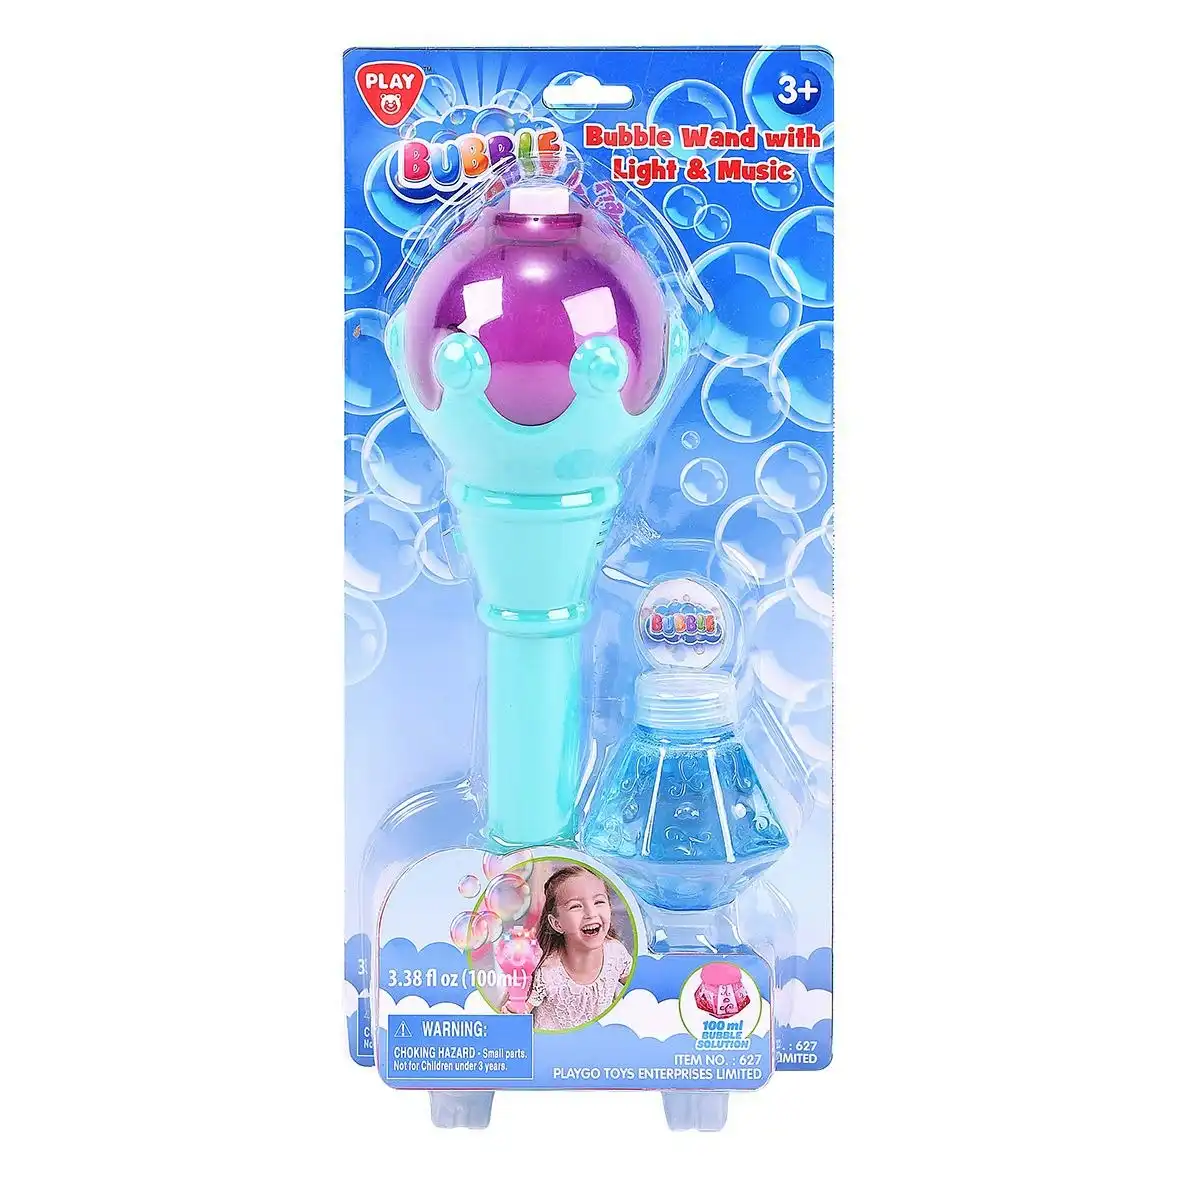 Battery Operated Bubble Wand With Light & Music Playgo Toys Ent. Ltd.